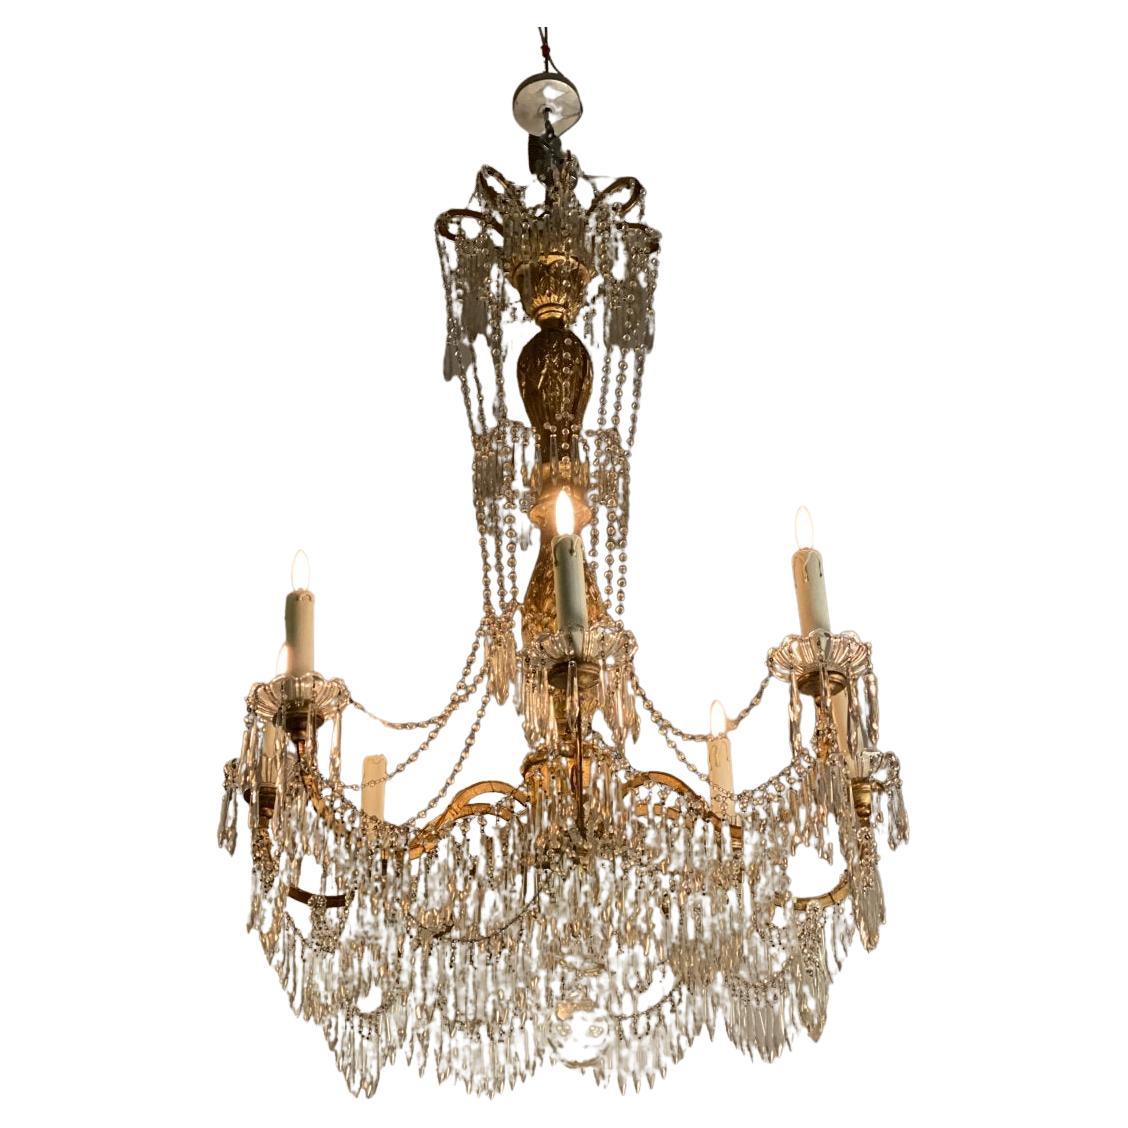 Chandelier 8 Arms of Light, Tassels and Golden Wood, Italy, Early 20th Century